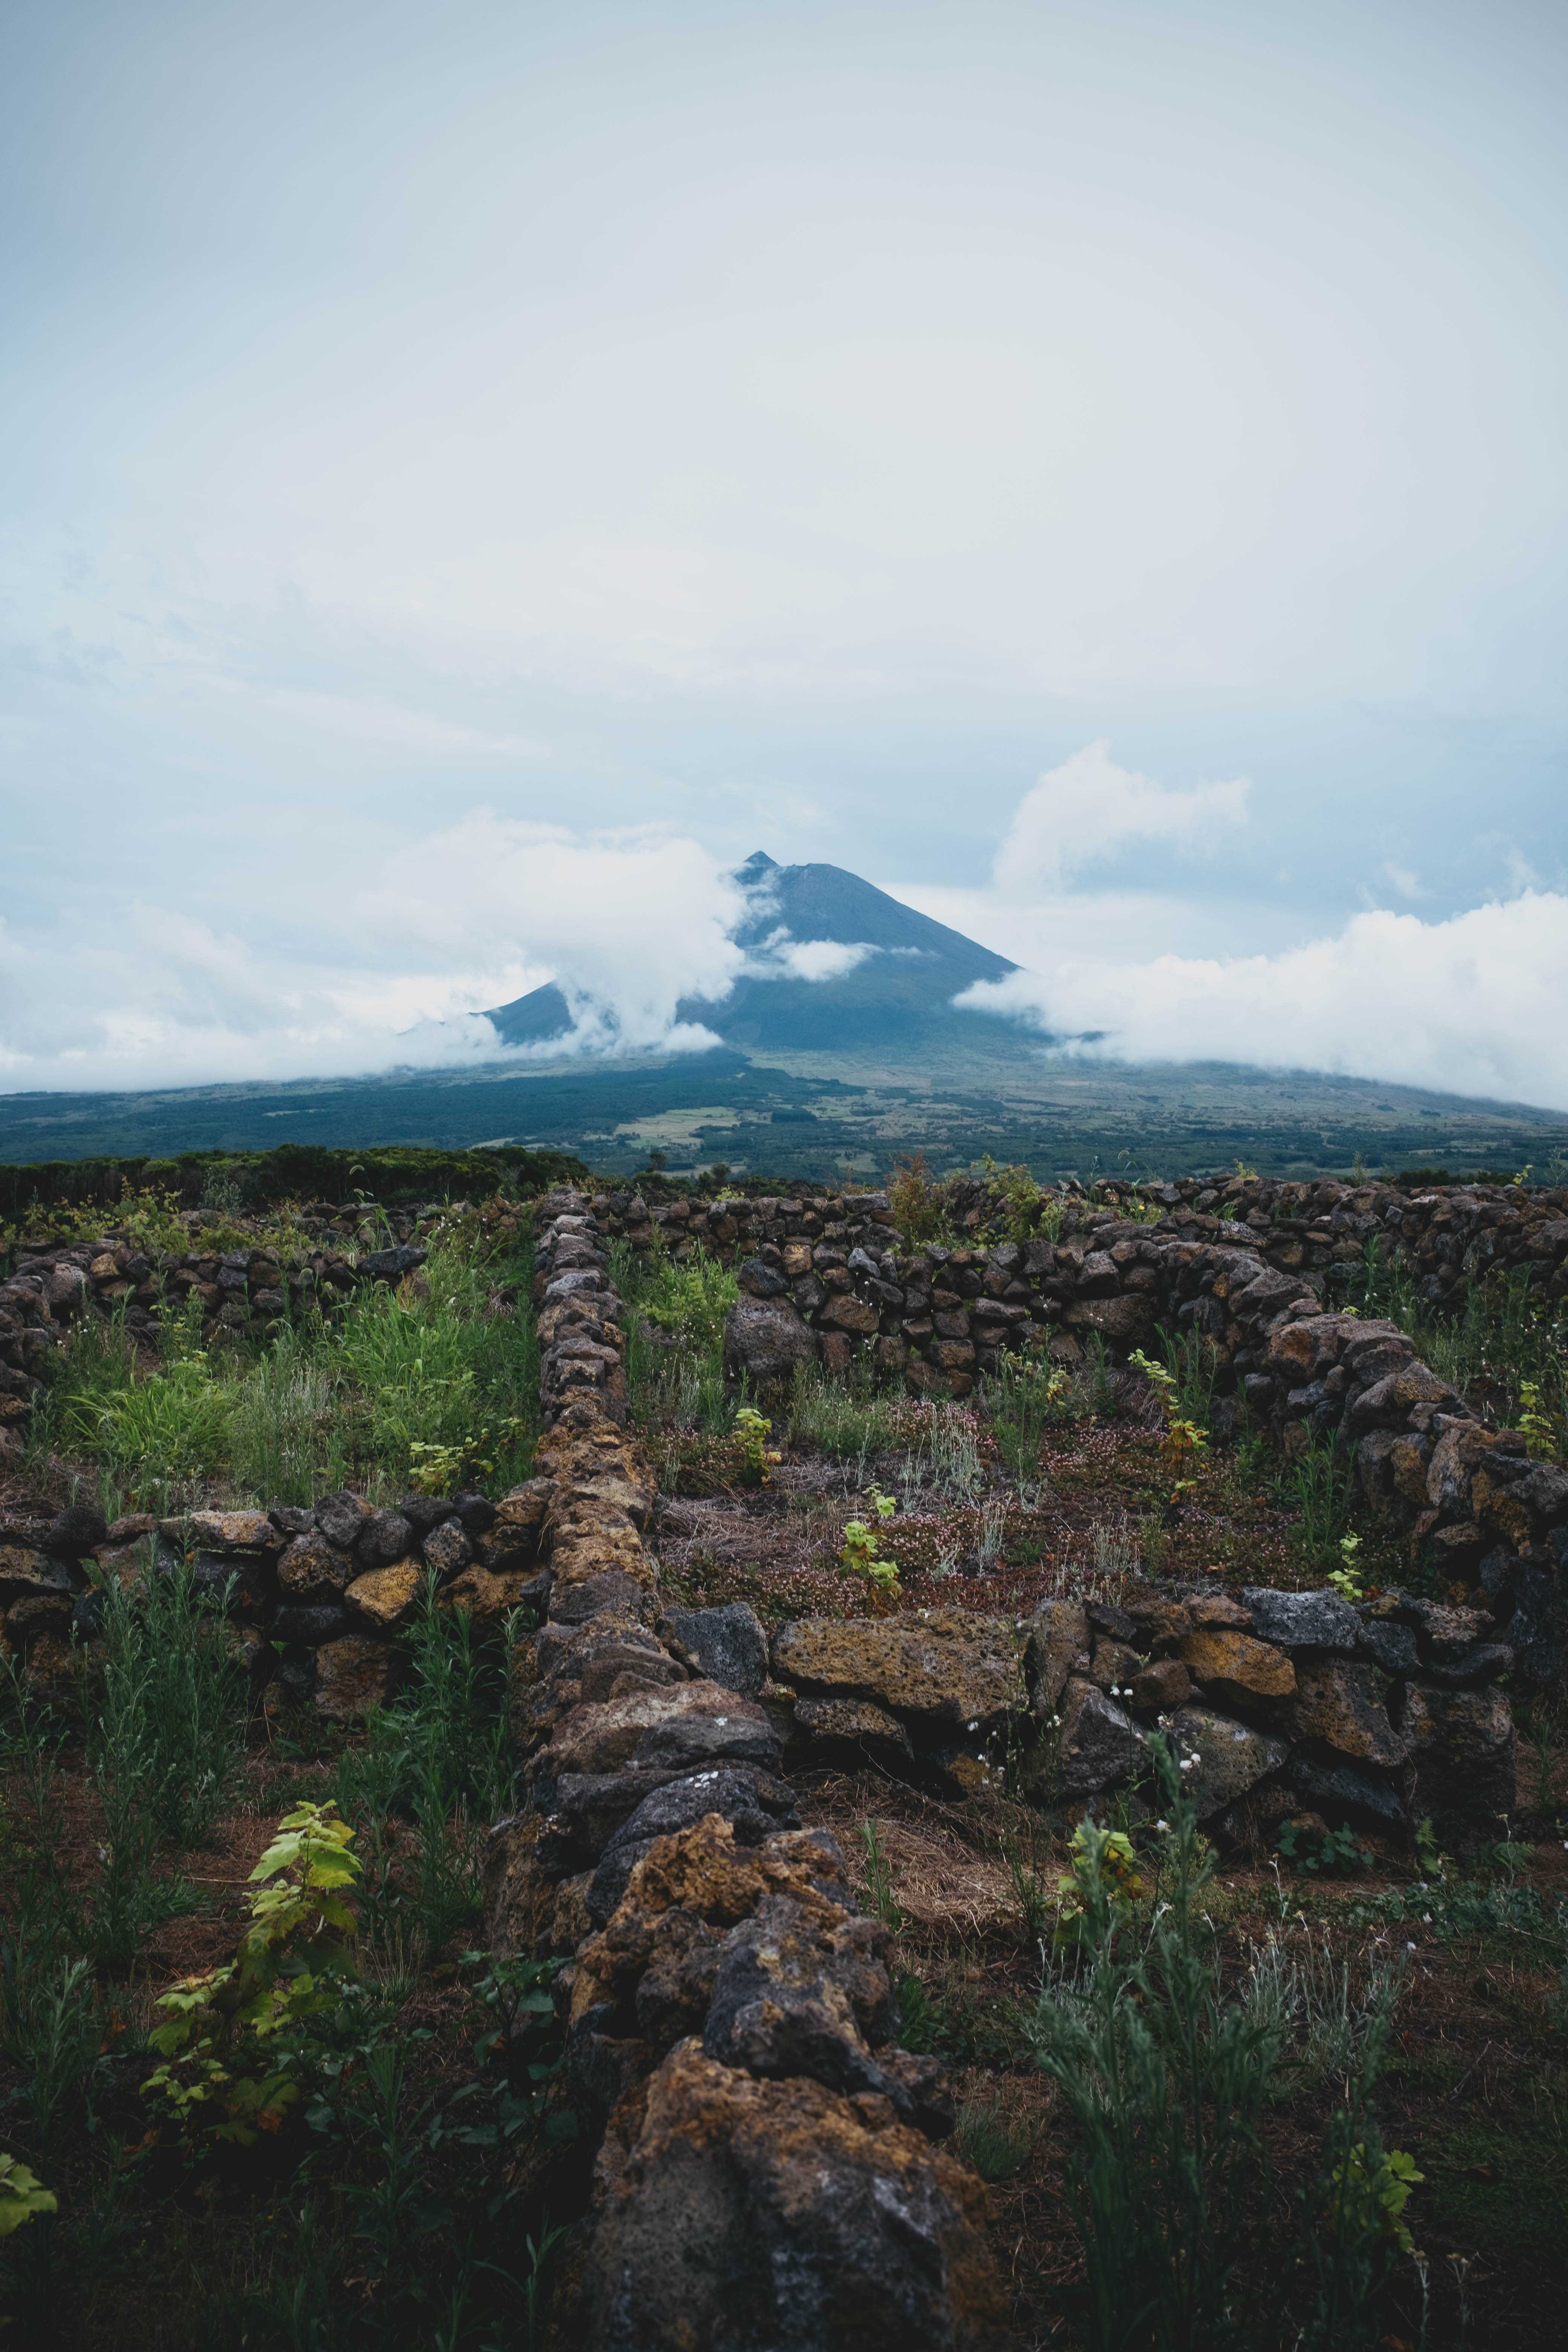 Stacks of volcanic rocks with Mount Pico emerging from the clouds in the background.